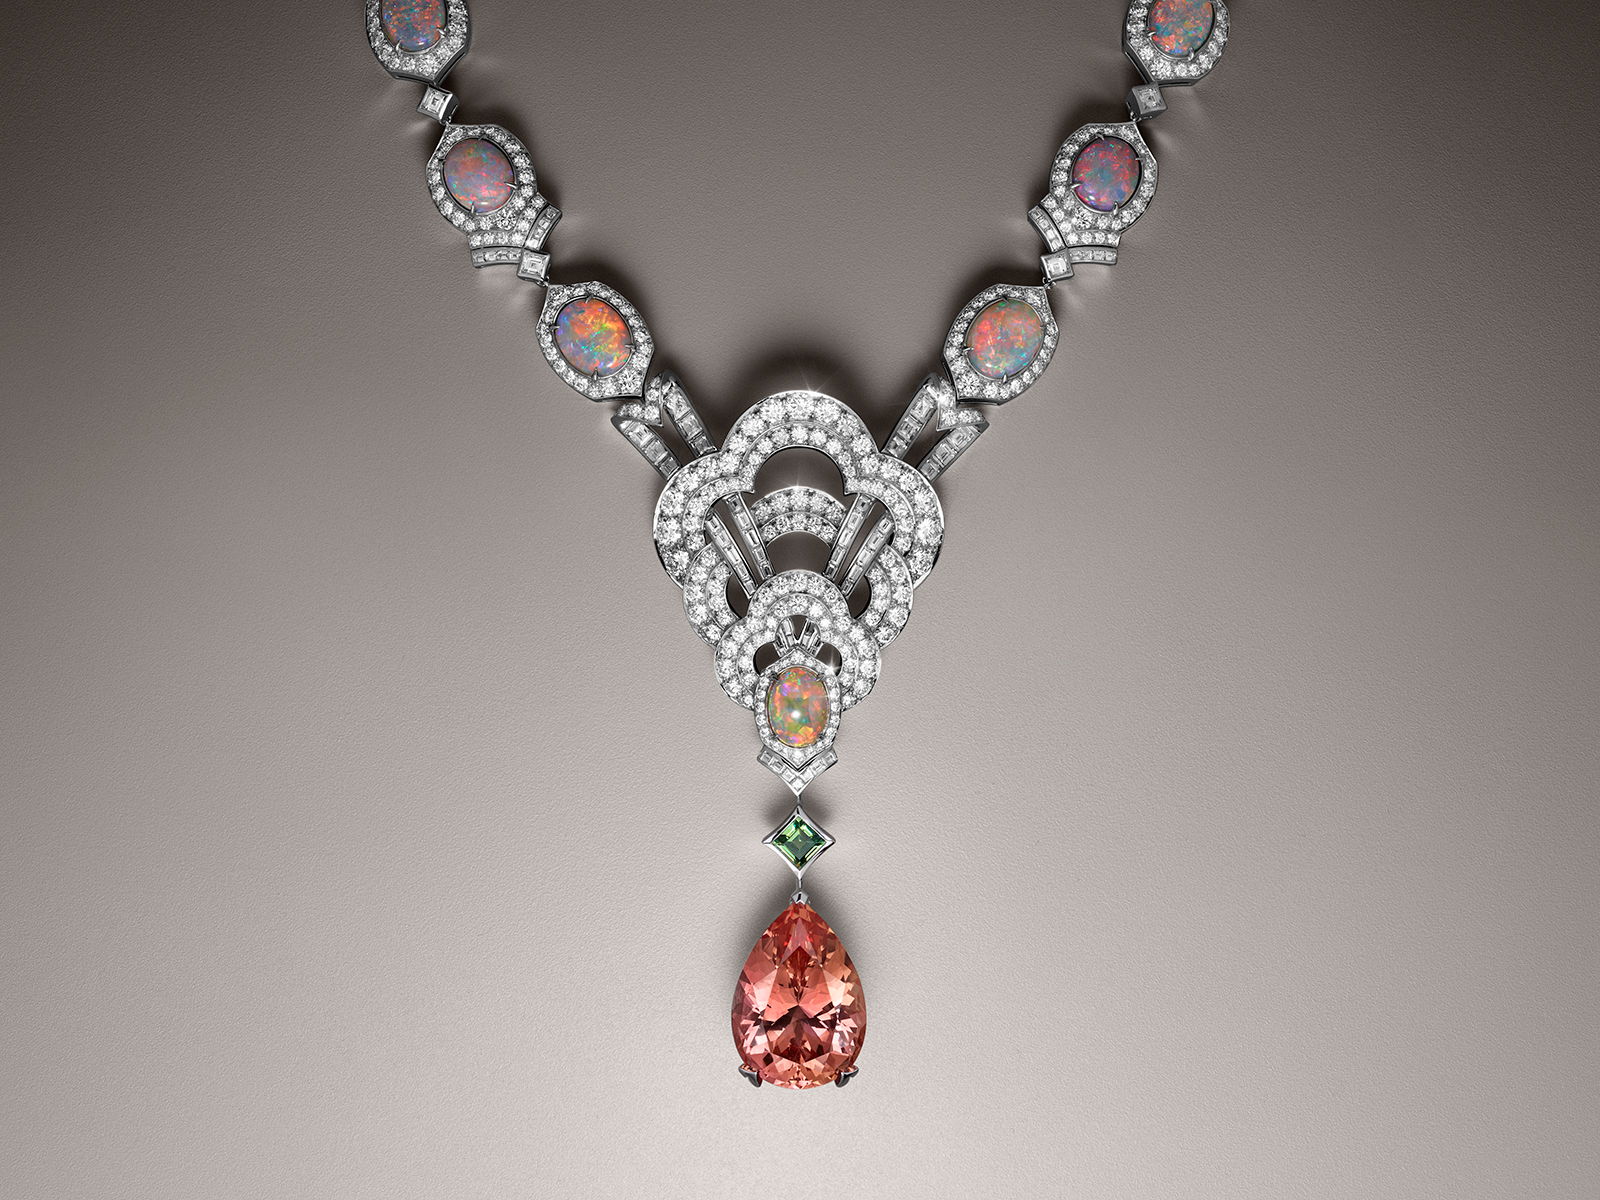 Louis Vuitton High Jewelry Pink Sapphire And Diamond Necklace Cost